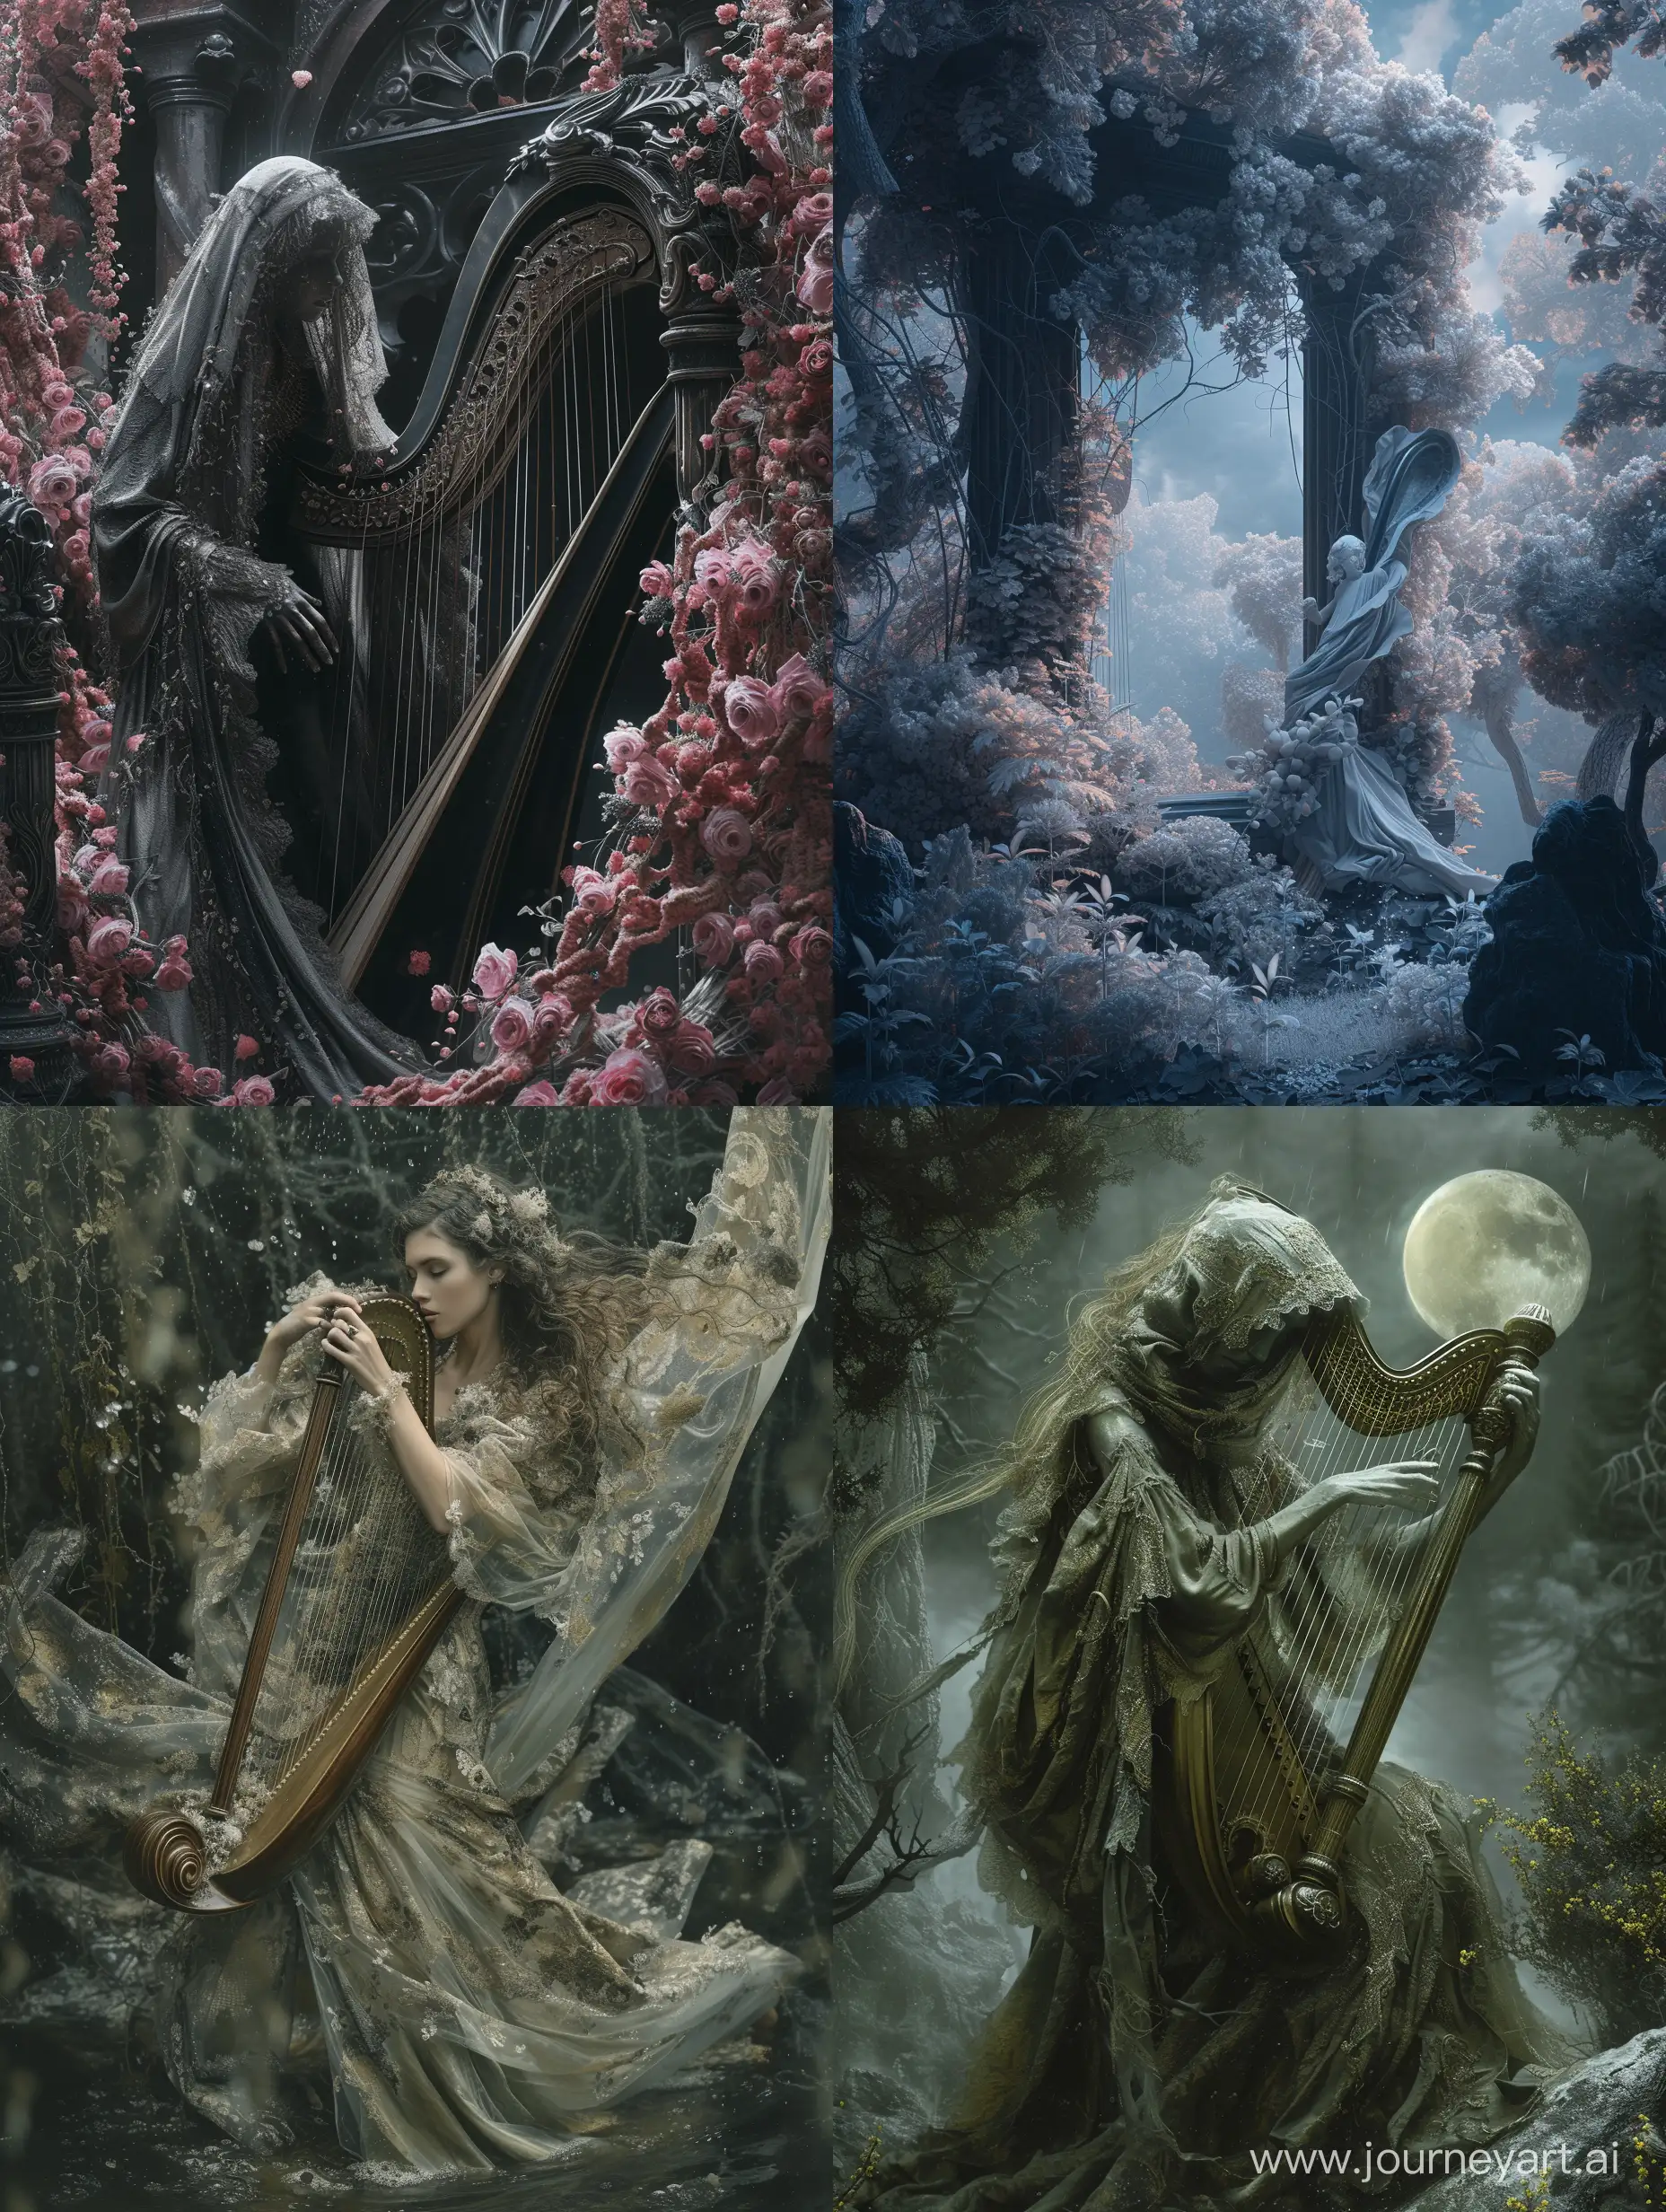 Ephemeral, ghostly apparitions of a beautiful spectral woman, dressed in flowing, tattered garments playing a large ornately detailed harp on a creepy foggy forest :: 16k :: high contrast extremely detailed, 16k resolution, intricate